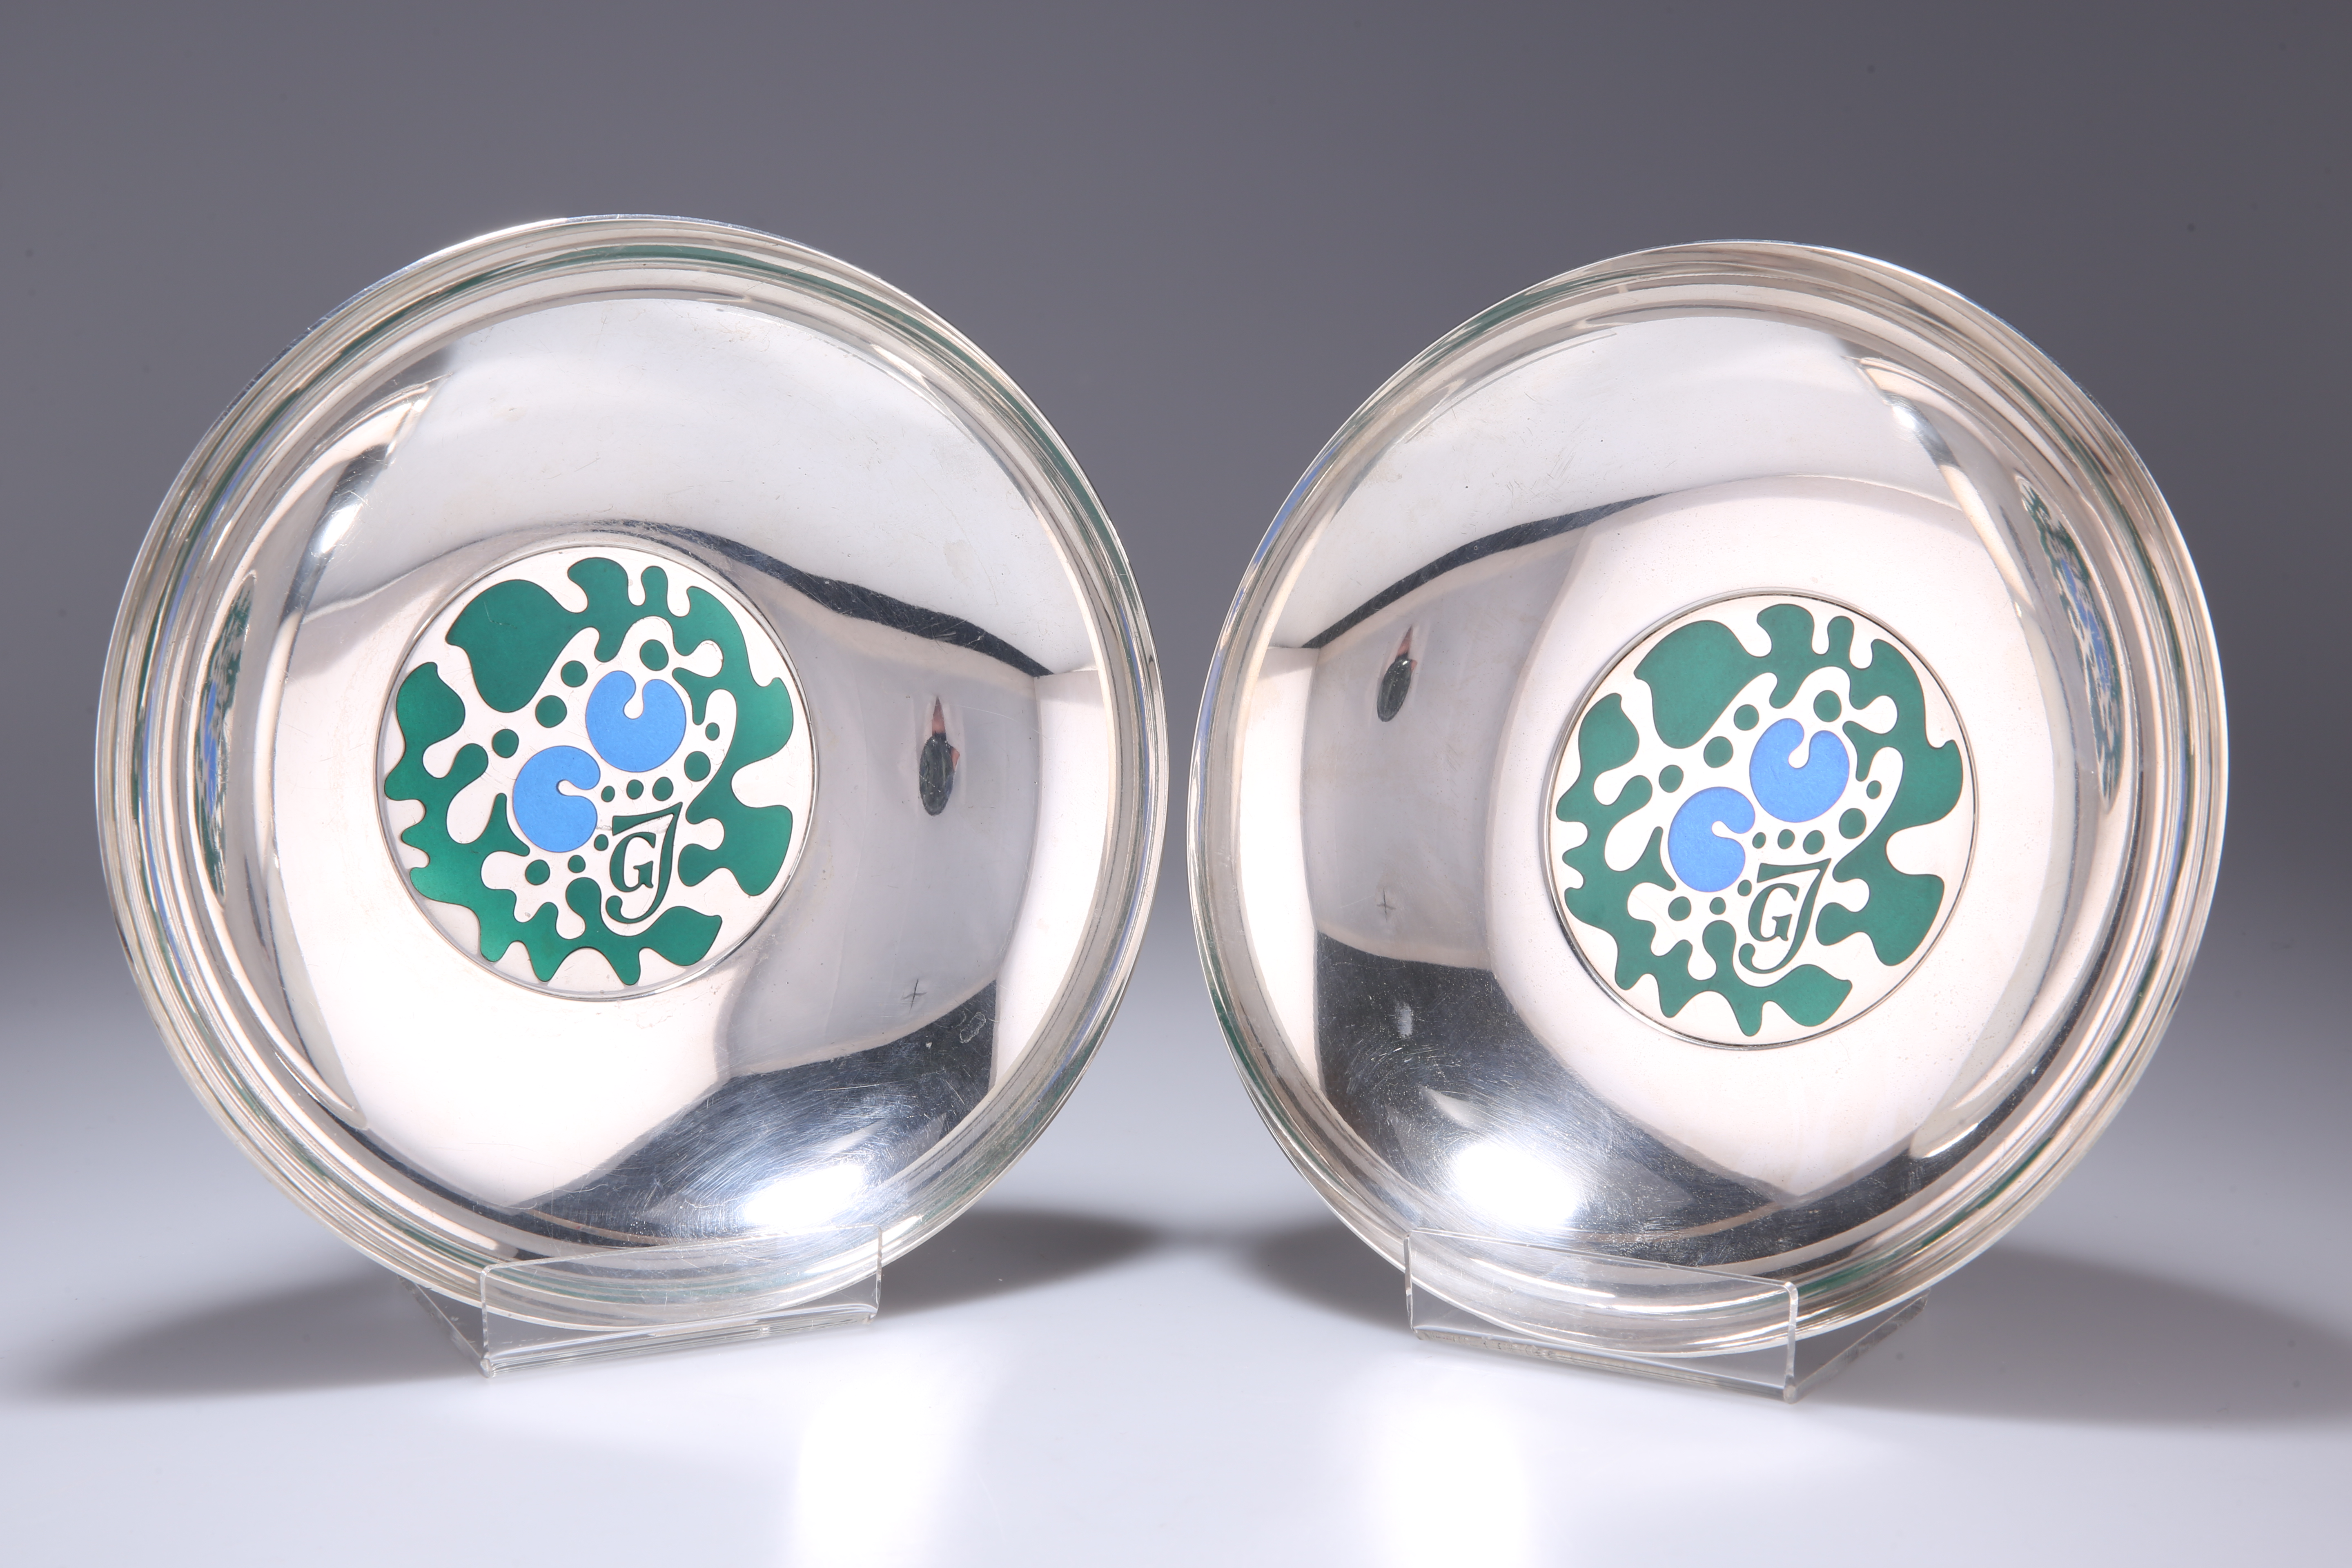 A RARE PAIR OF DANISH SILVER AND ENAMEL BOWLS - Image 2 of 3